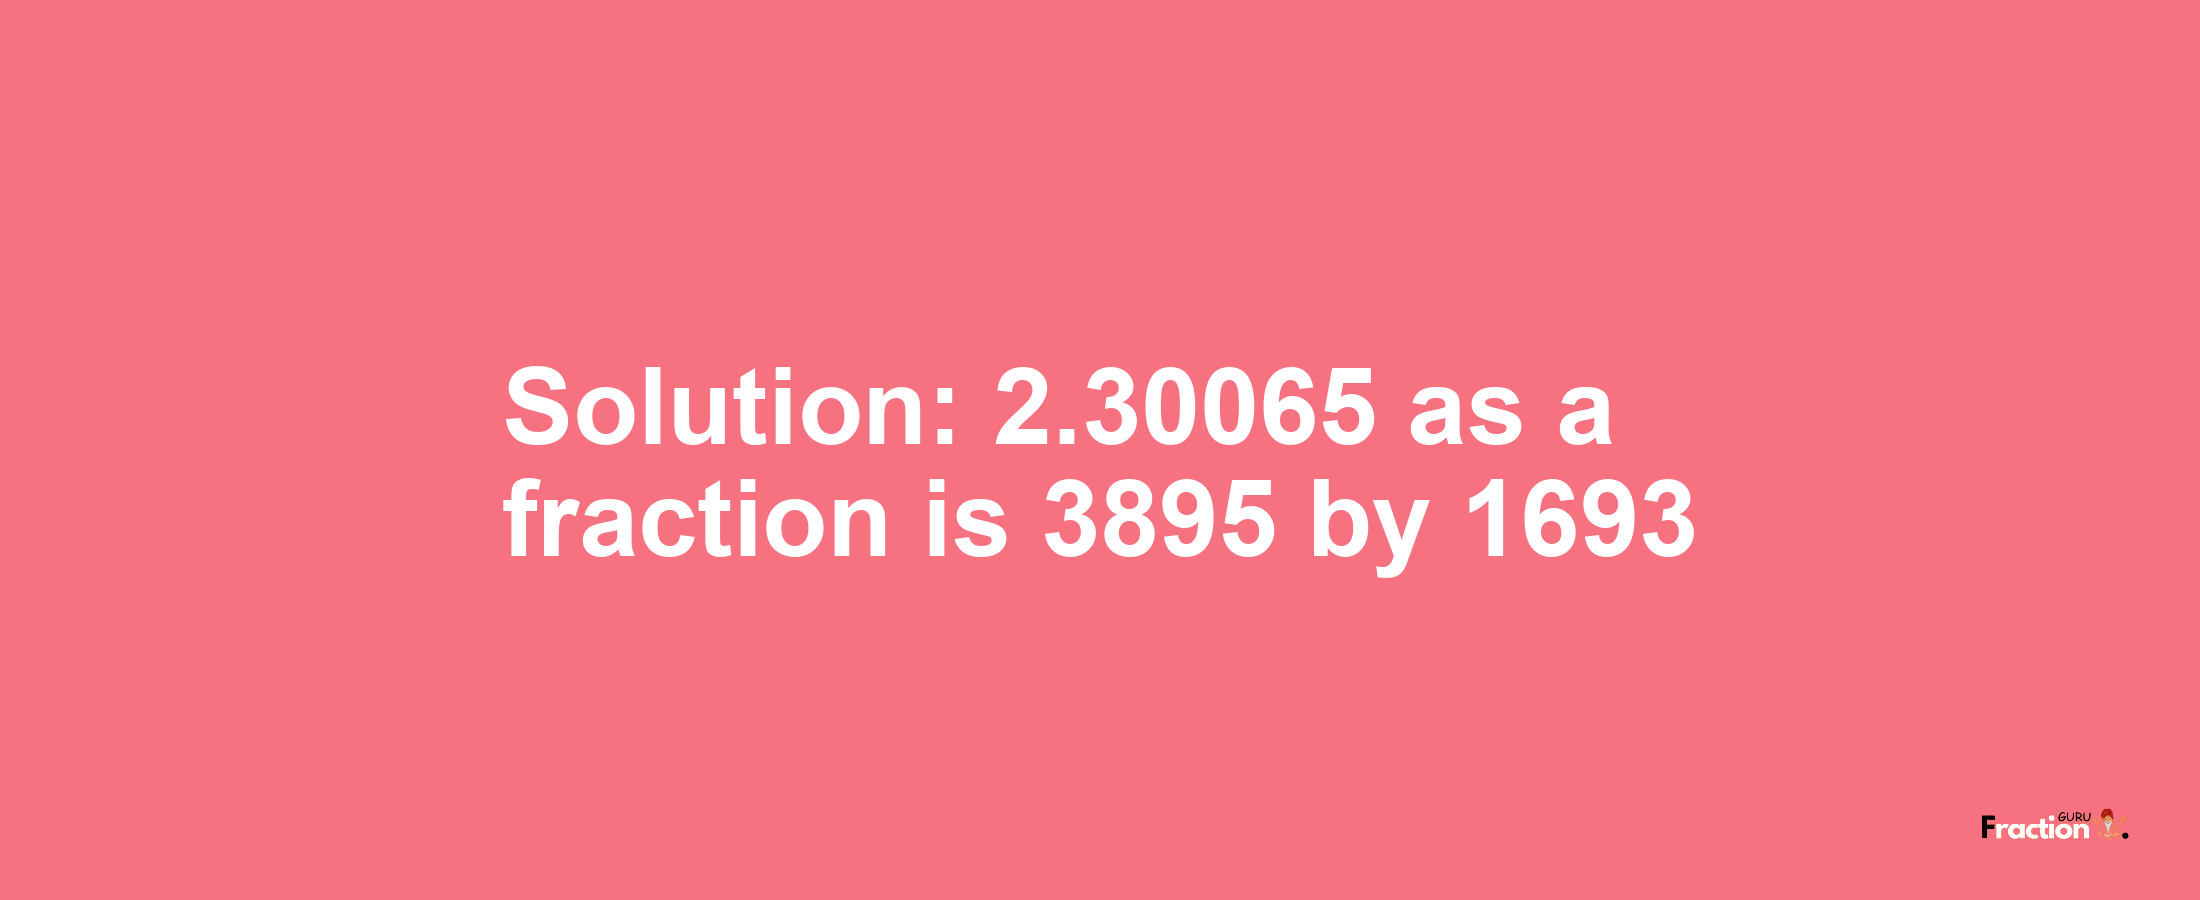 Solution:2.30065 as a fraction is 3895/1693